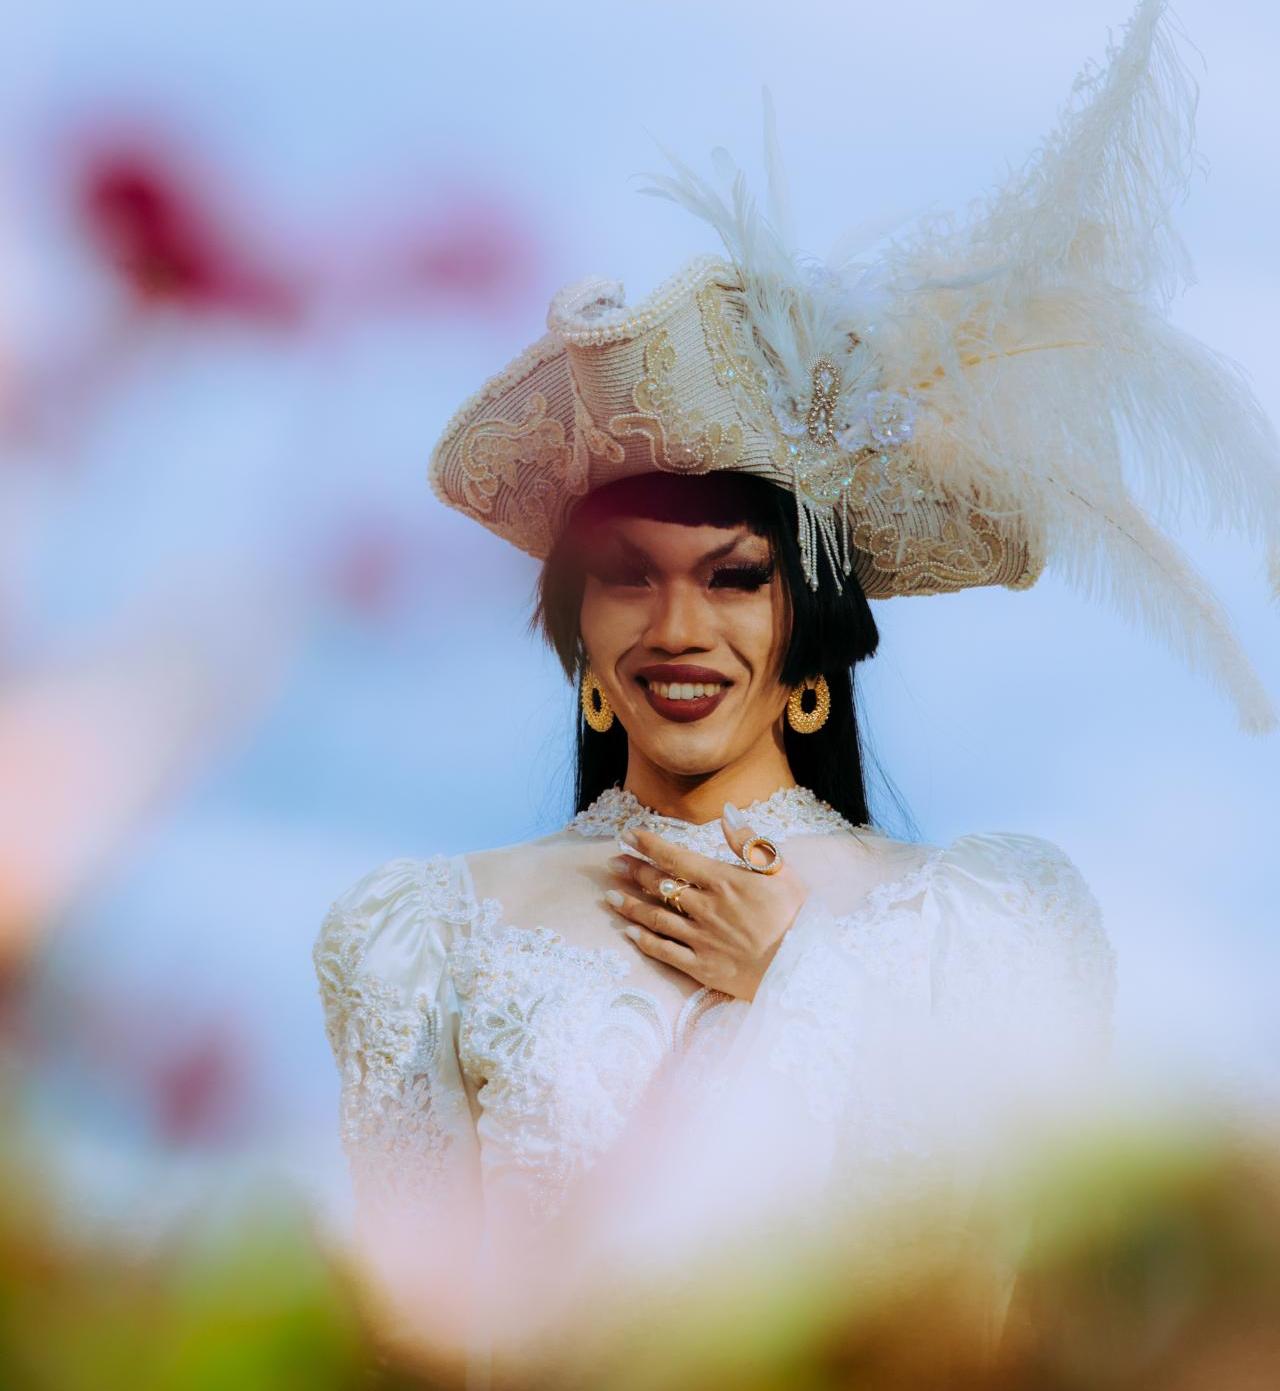 Asian American women in a white hat and dress smiling against a blue sky. Out of focus flowers in the foreground.